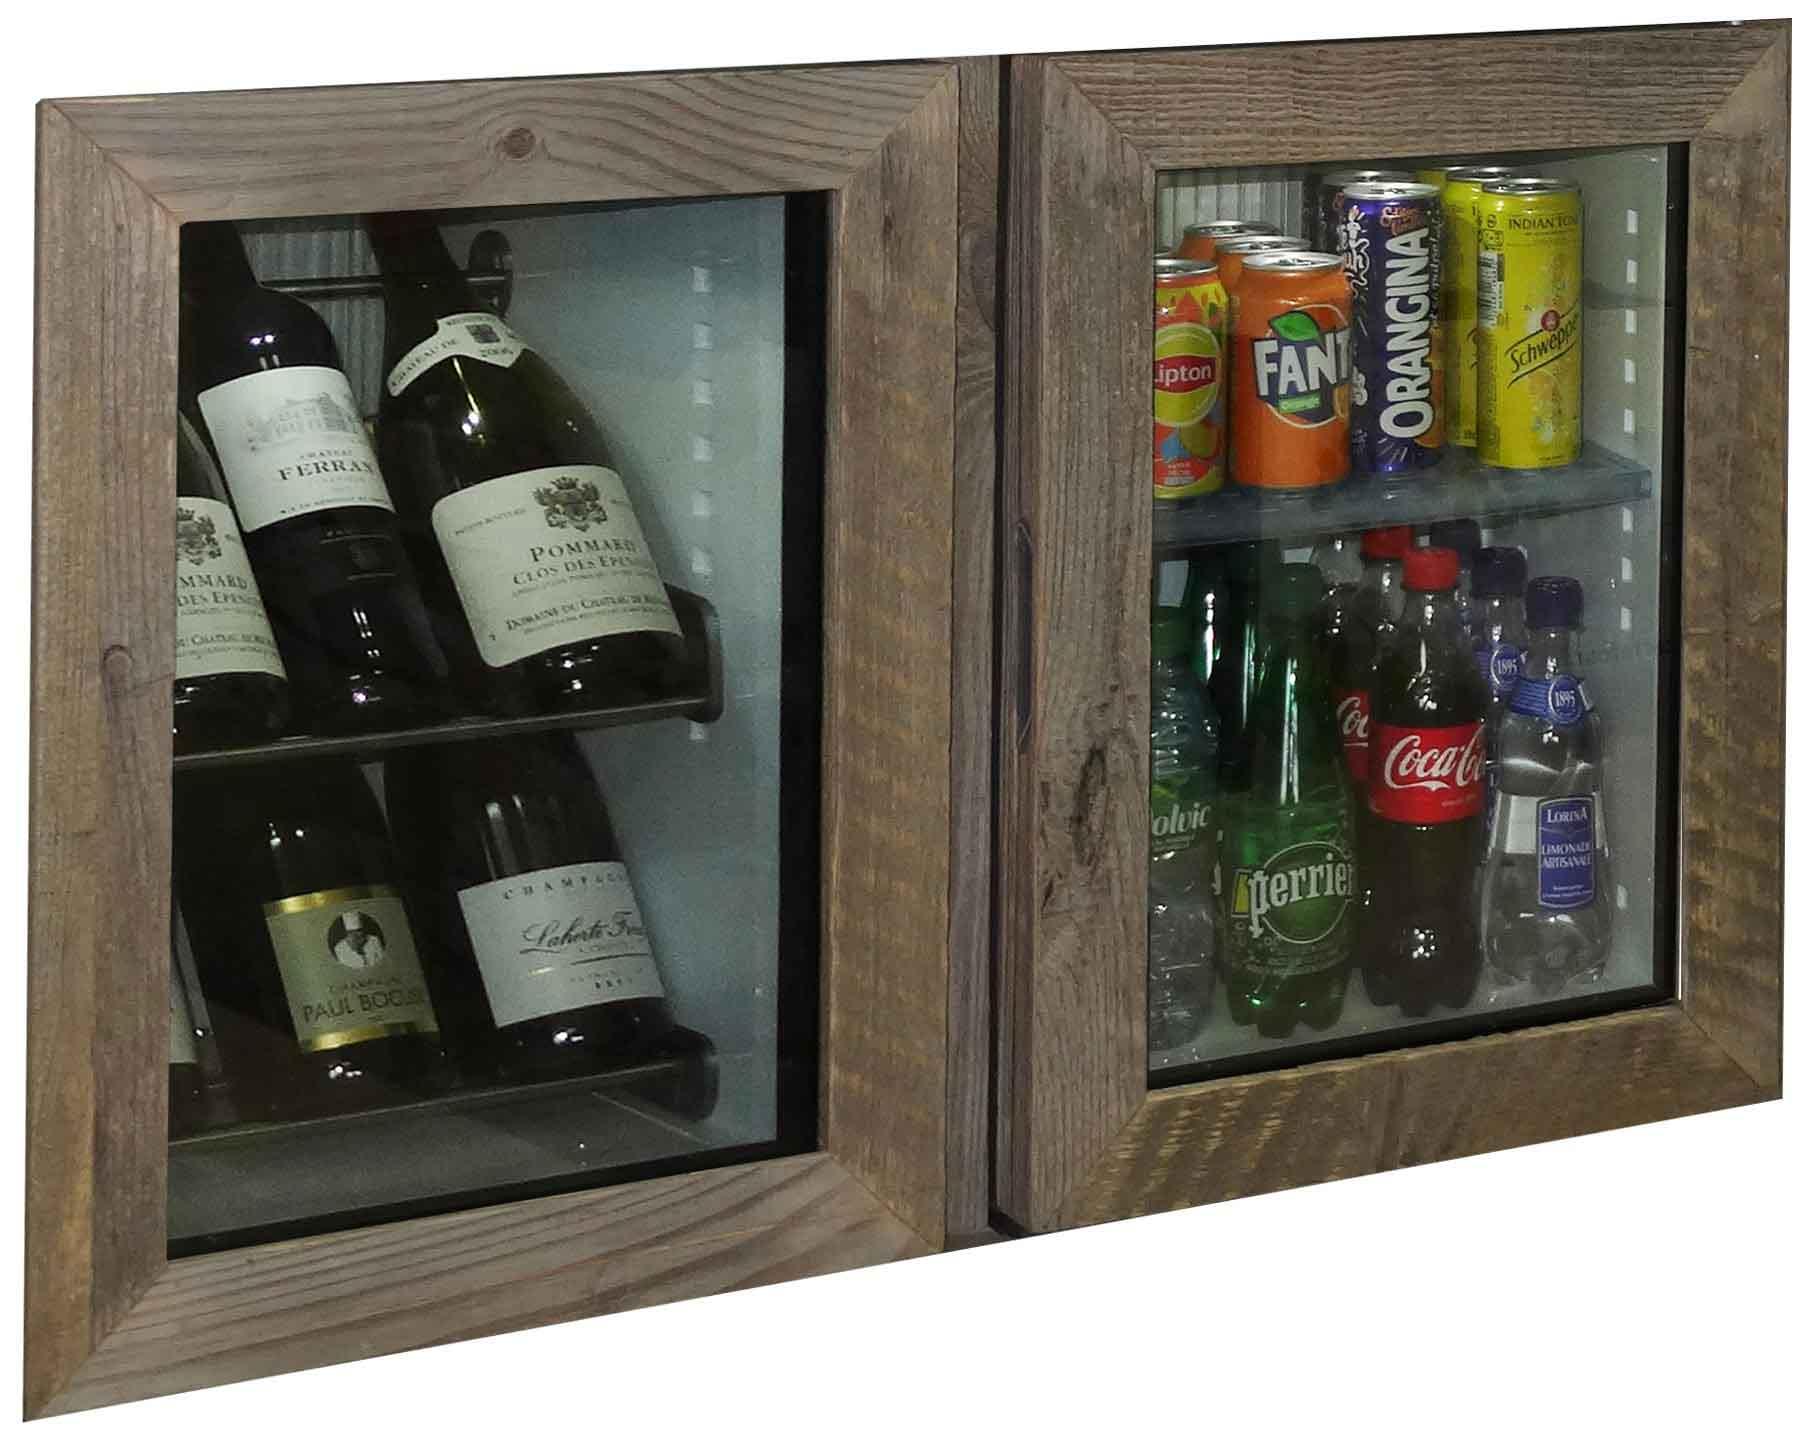 Minibar on the right hand side and Mini-winebar on the left hand side